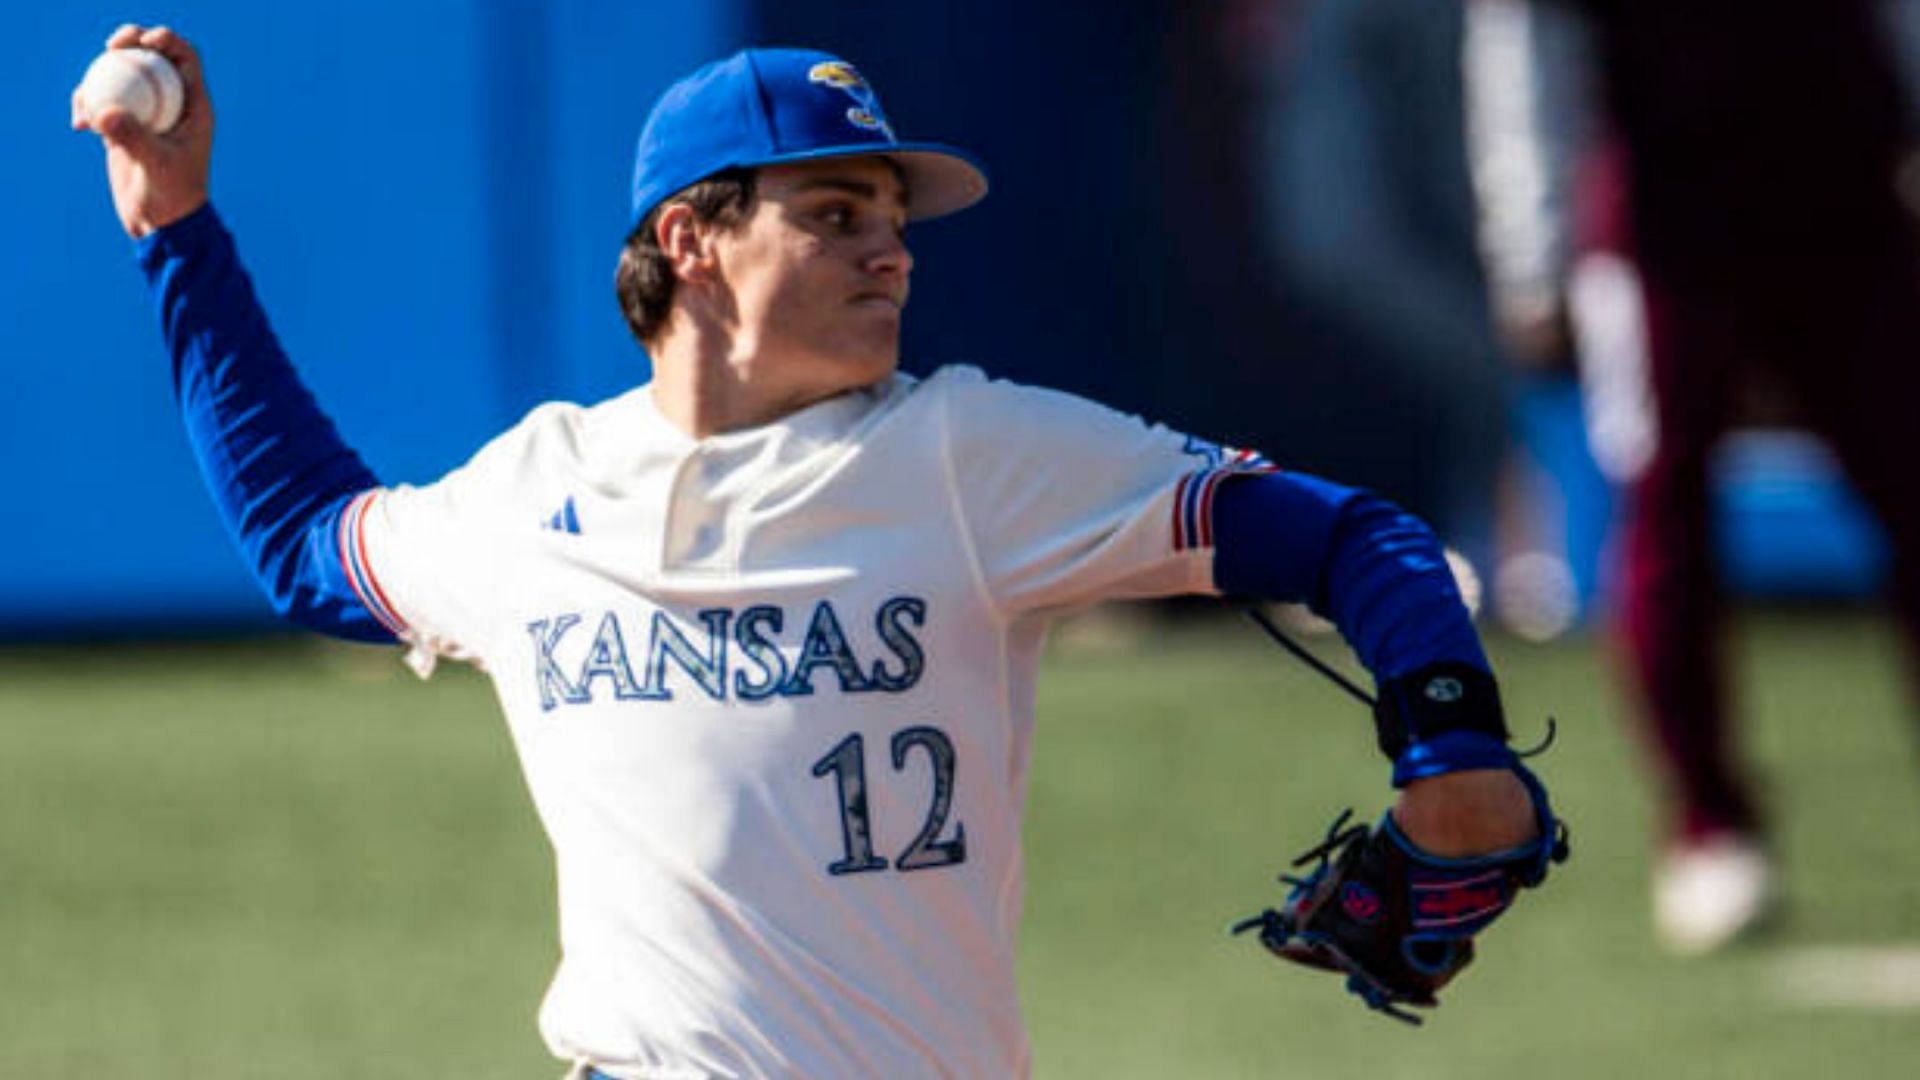 Dominic Voegele is 7-2 with a 2.65 ERA for Kansas this season